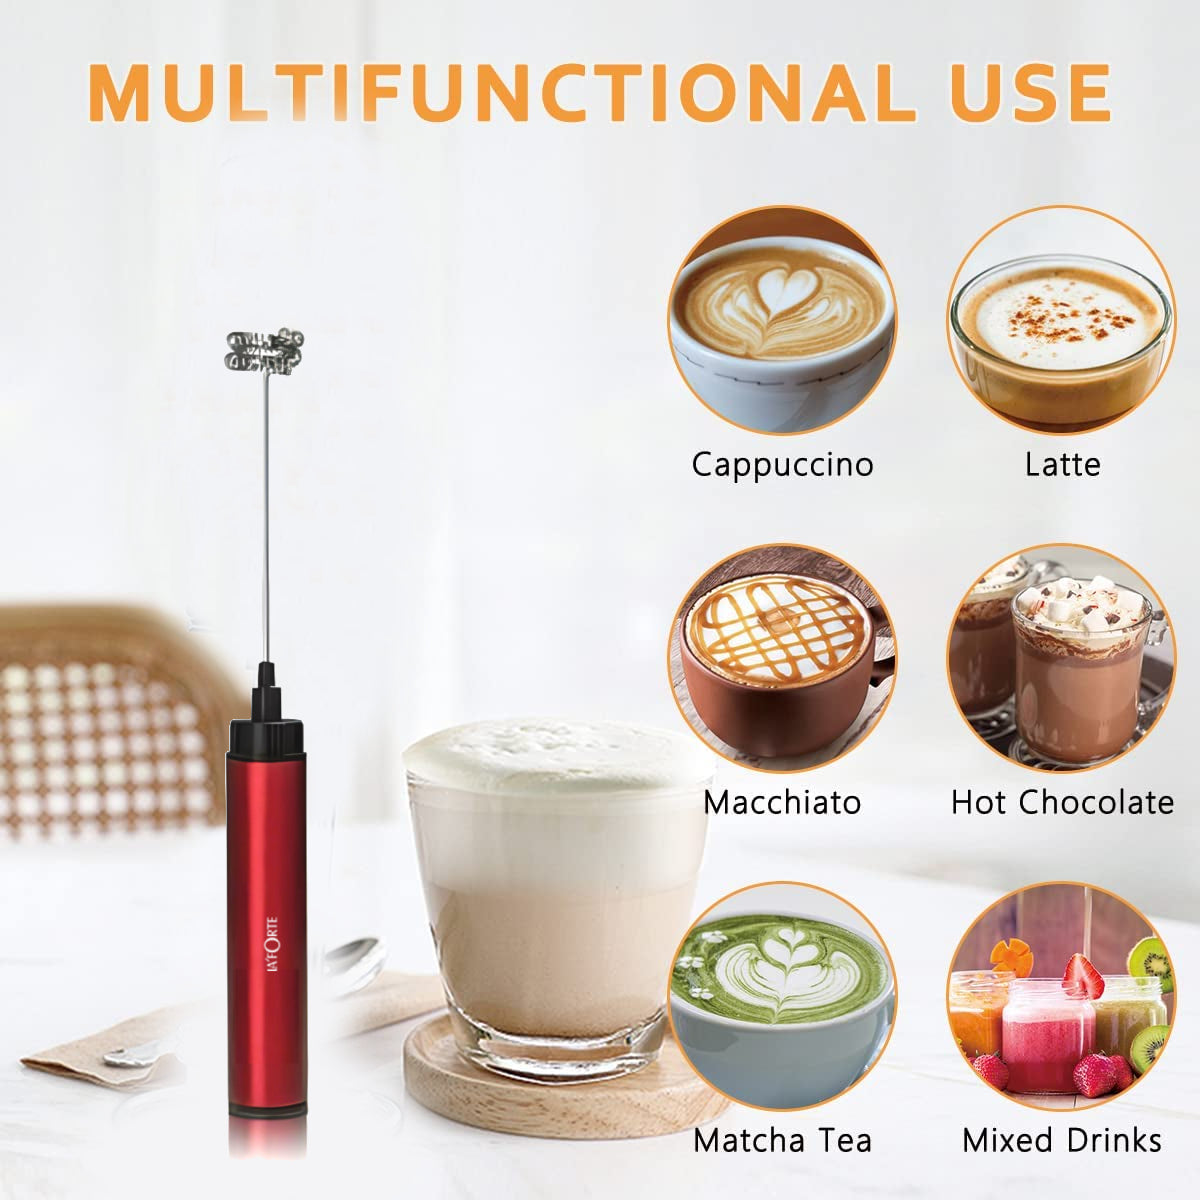 LA' FORTE Rechargeable Mini Blender- Milk Frother, Whisker, Coffee